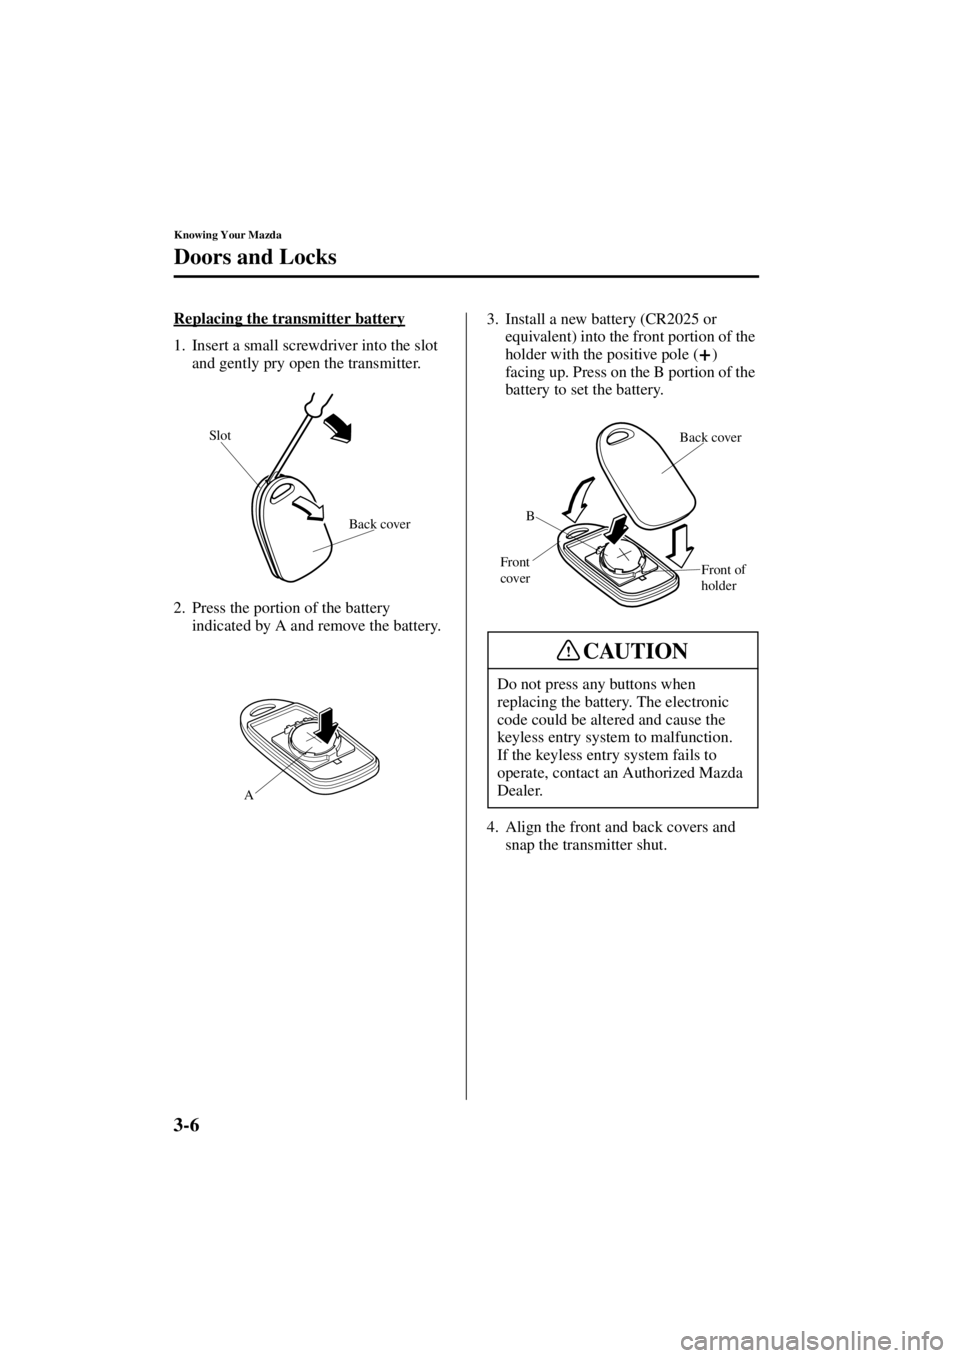 MAZDA MODEL SPEED MX-5 MIATA 2004 Service Manual 3-6
Knowing Your Mazda
Doors and Locks
Form No. 8T02-EA-03L
Replacing the transmitter battery
1. Insert a small screwdriver into the slot and gently pry open the transmitter.
2. Press the portion of t